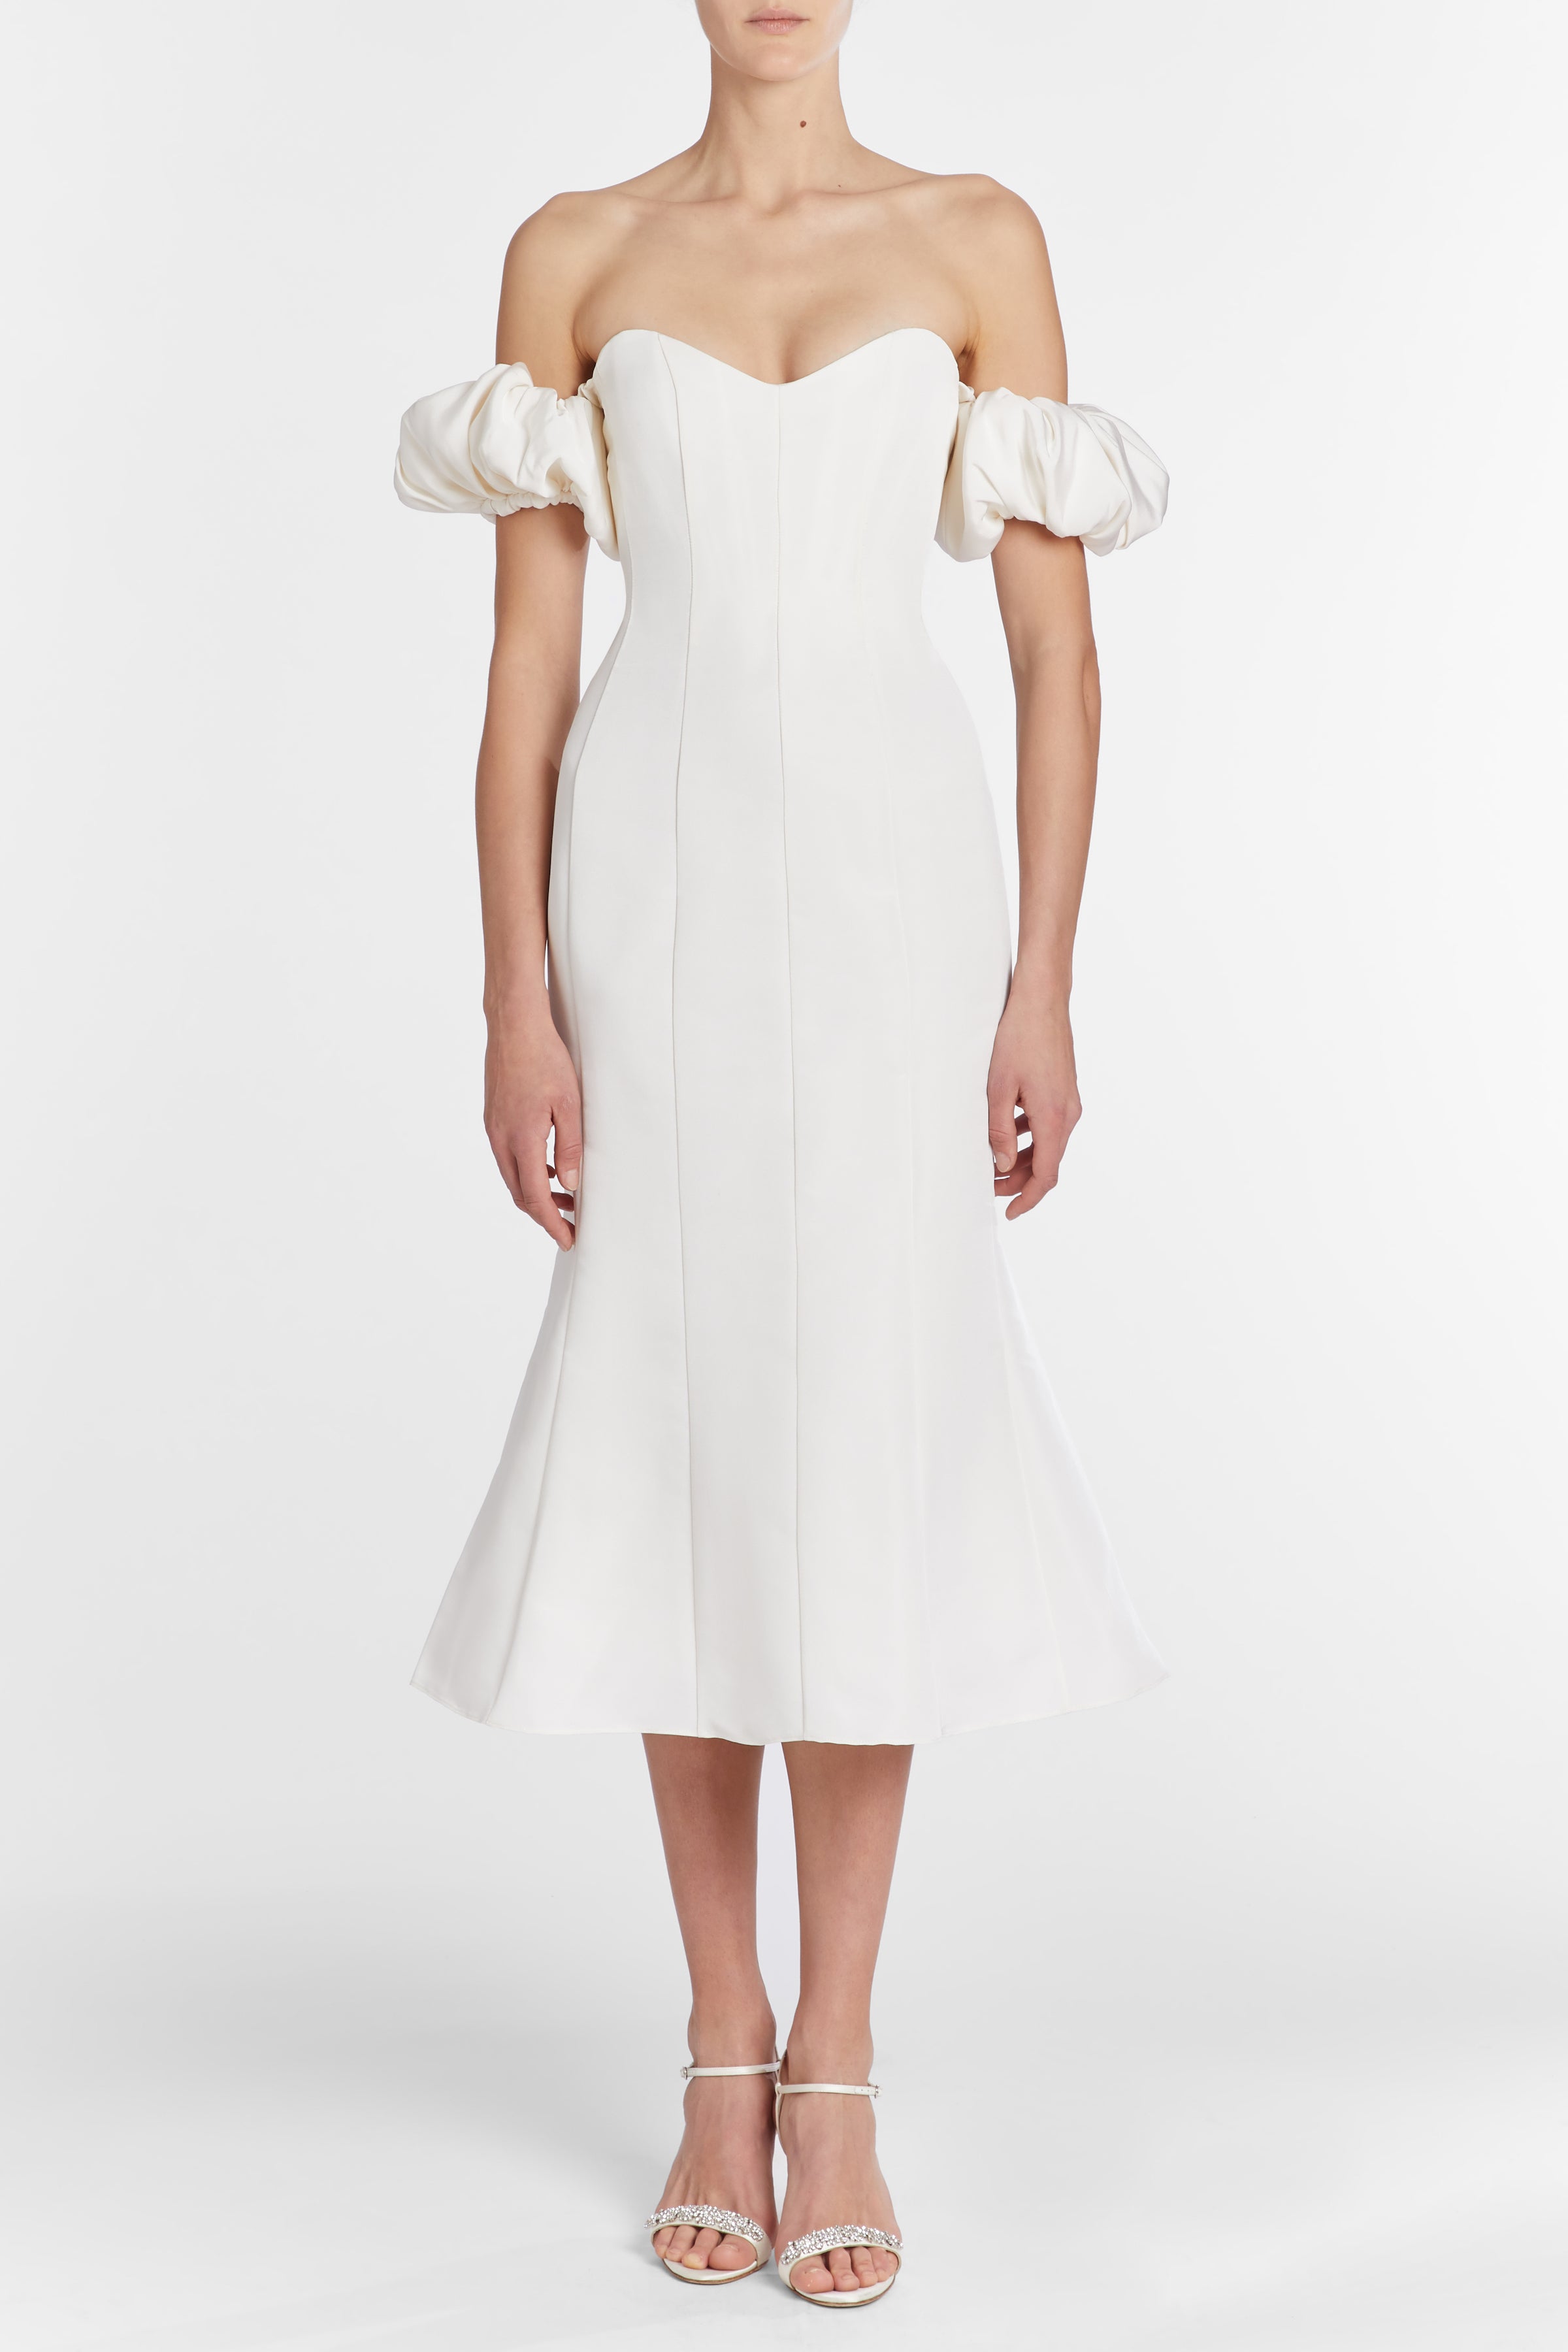 Maria White Silk Dress with Puff Sleeves